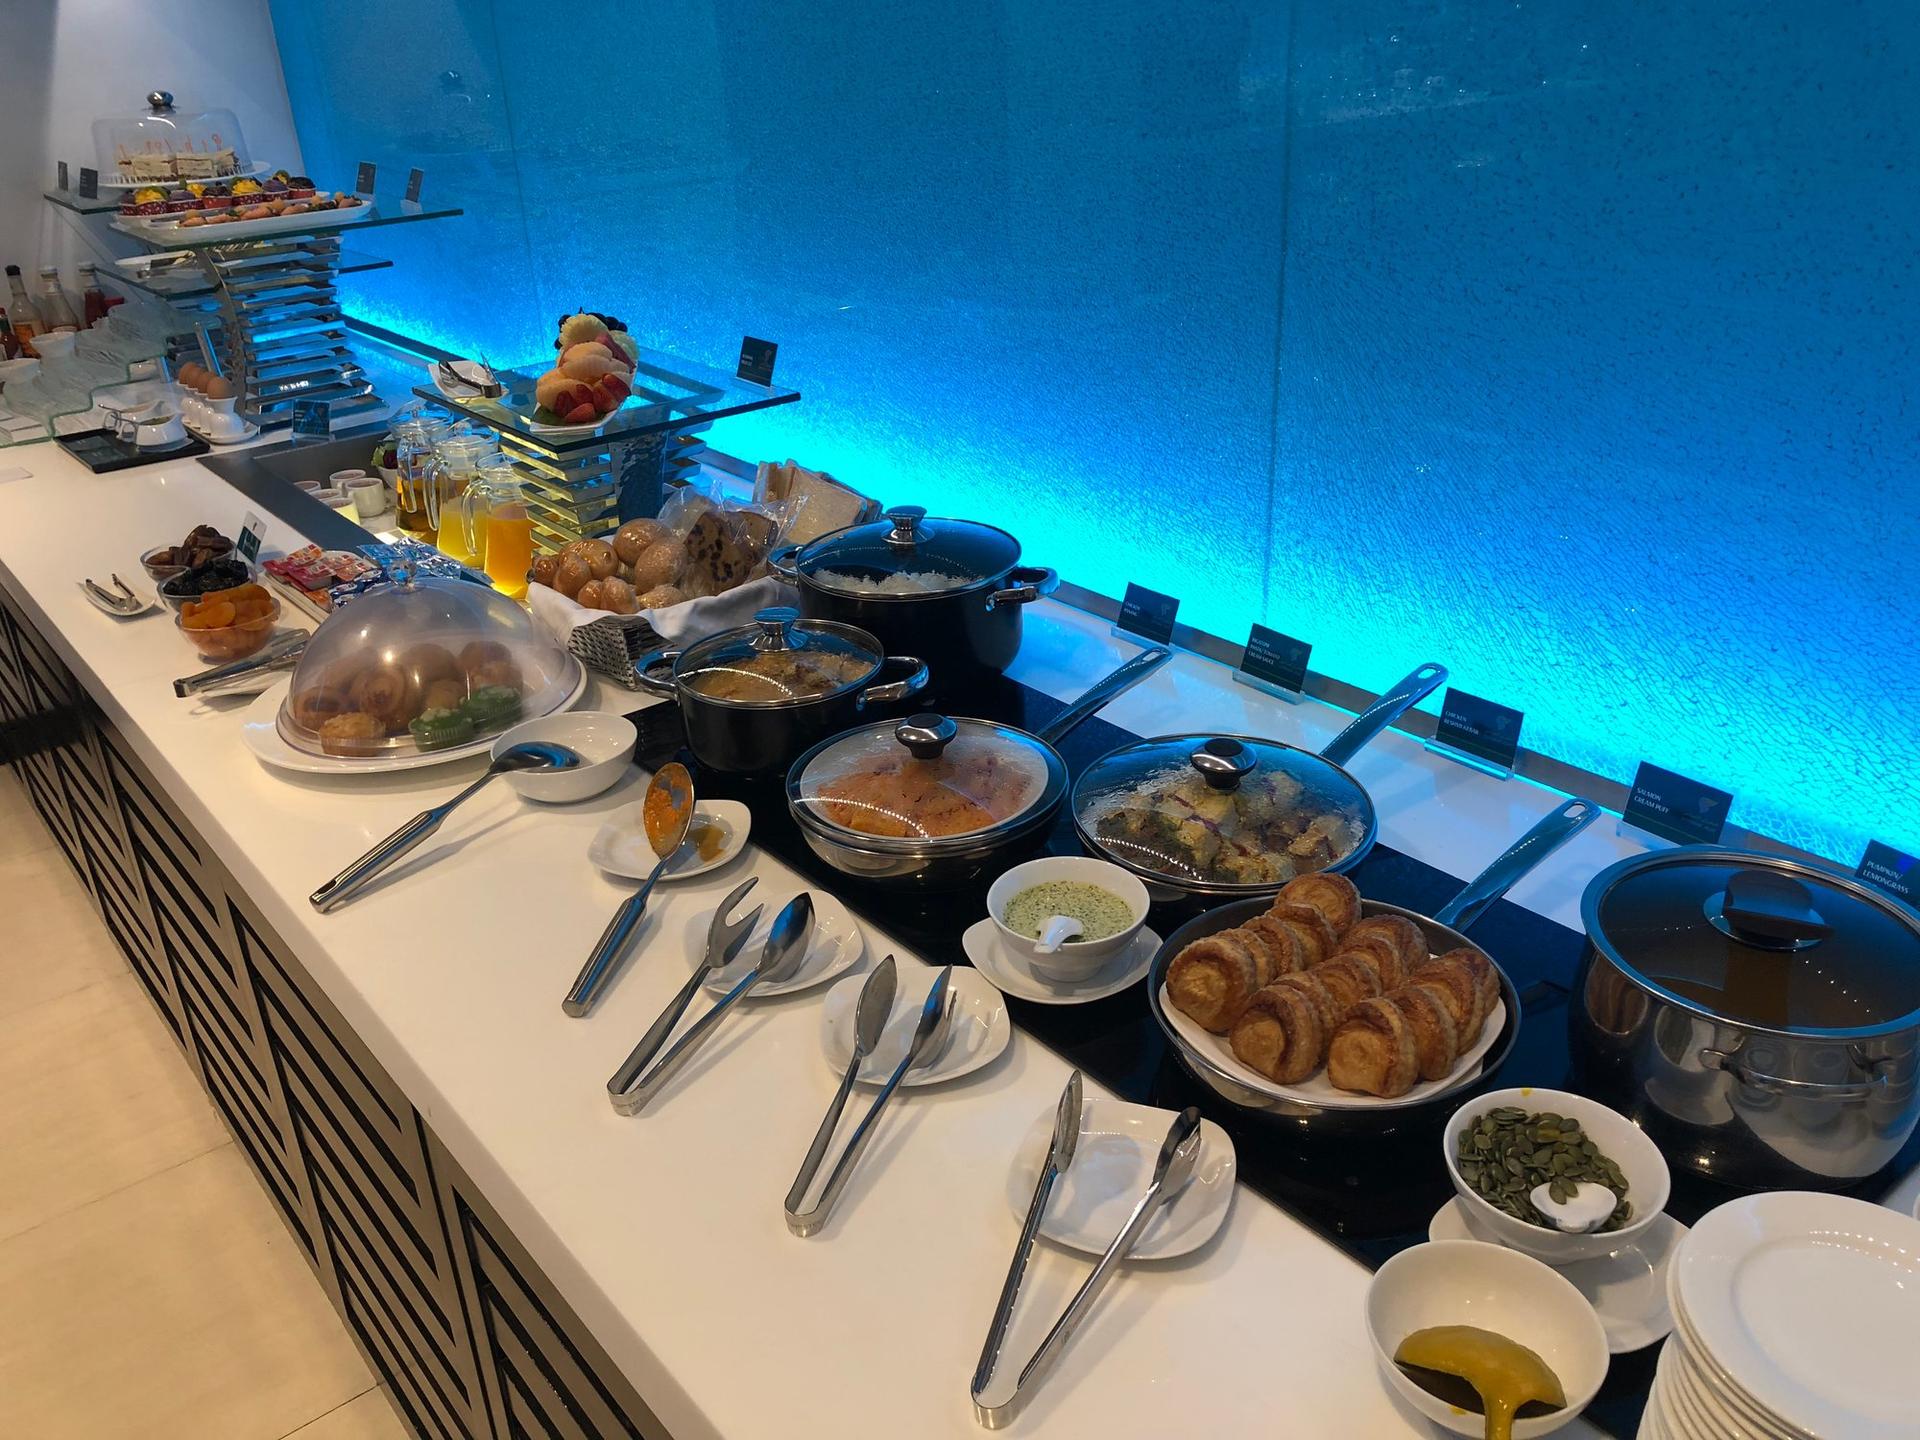 Oman Air First and Business Class Lounge image 27 of 50